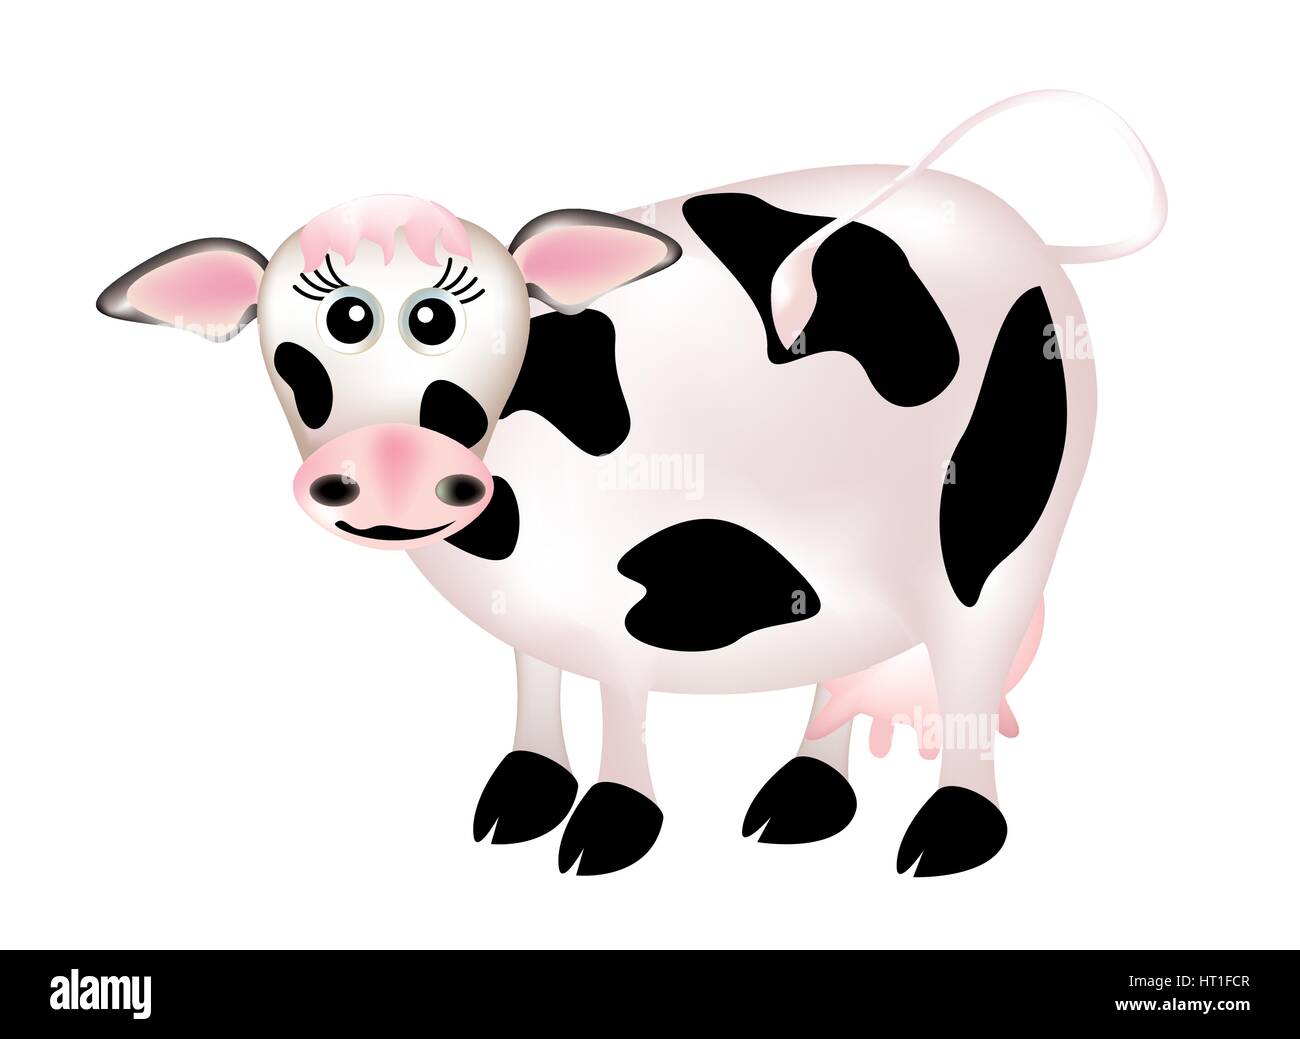 Cute Cow Stock Photos, Images and Backgrounds for Free Download